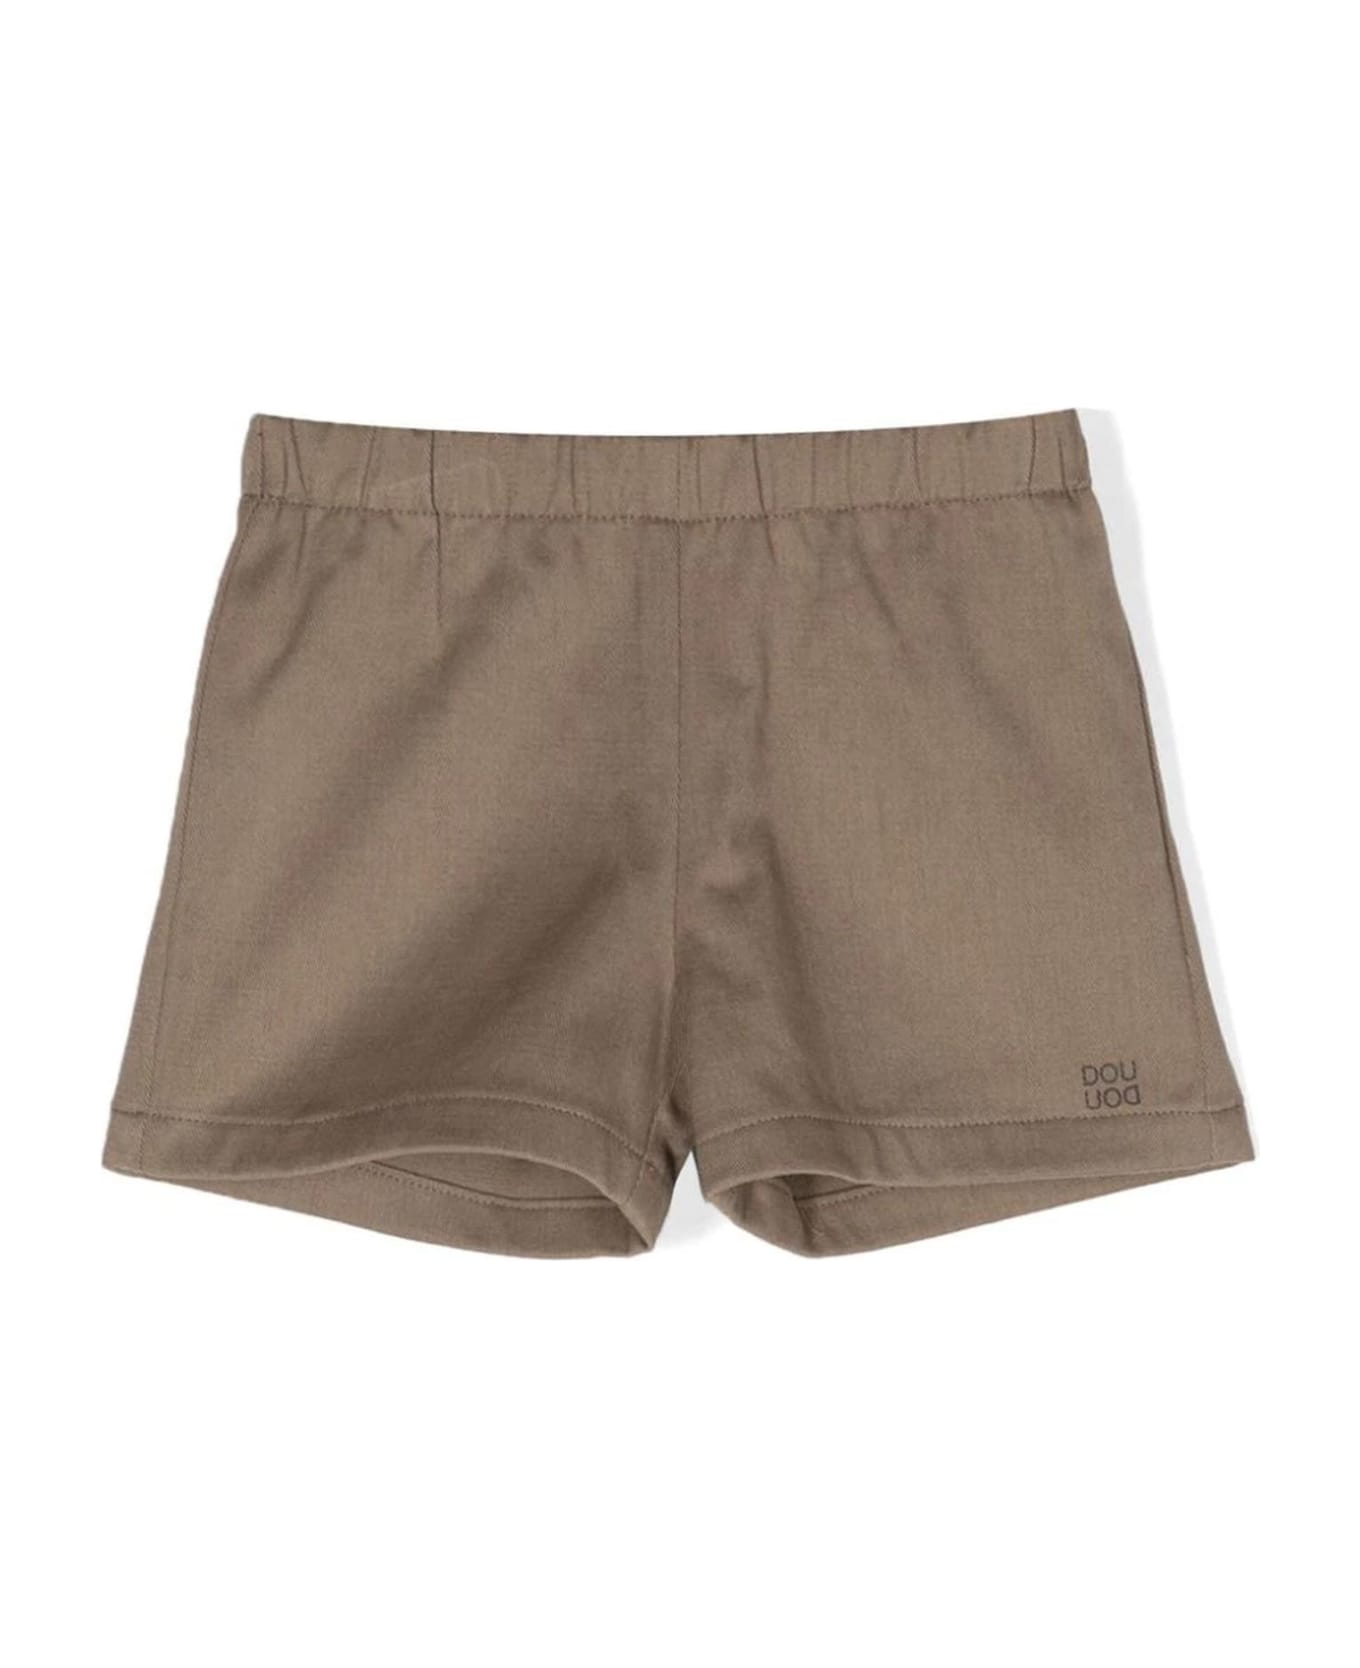 Douuod Shorts Brown - Brown